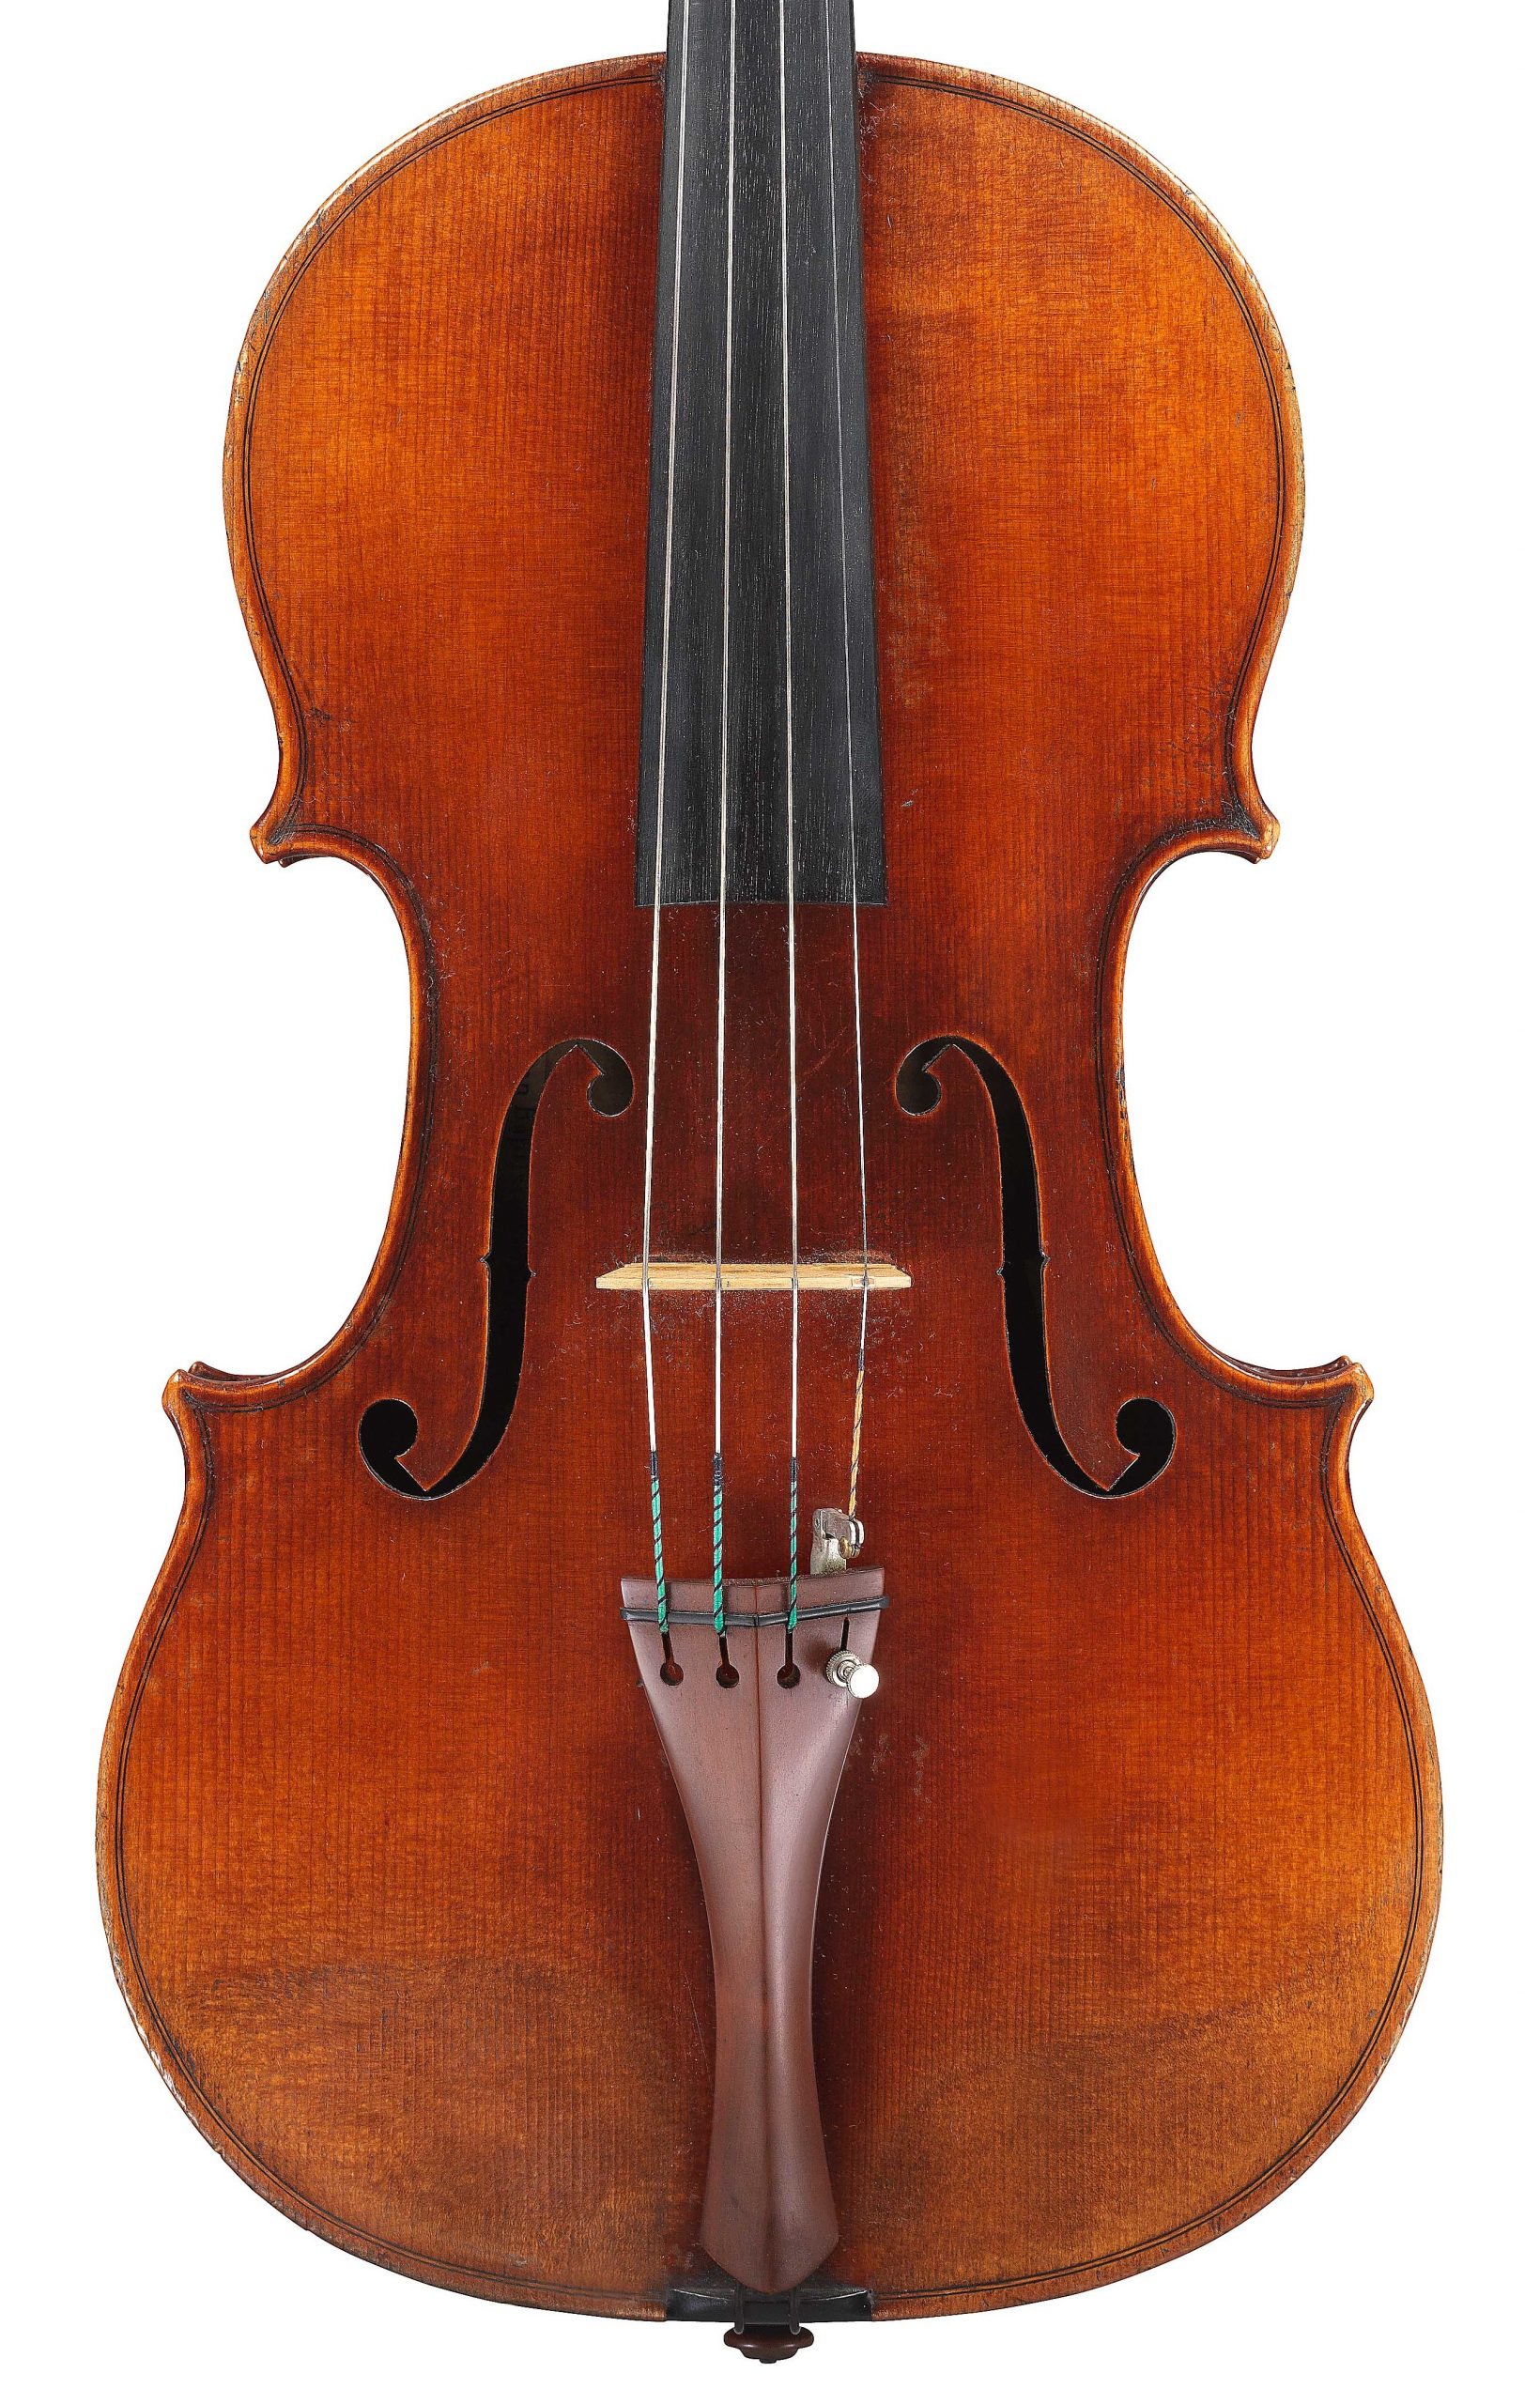 Viola by JB Vuillaume, dated 1859, ex-Karrman, exhibited by Ingles & Hayday at Sotheby's in 2012